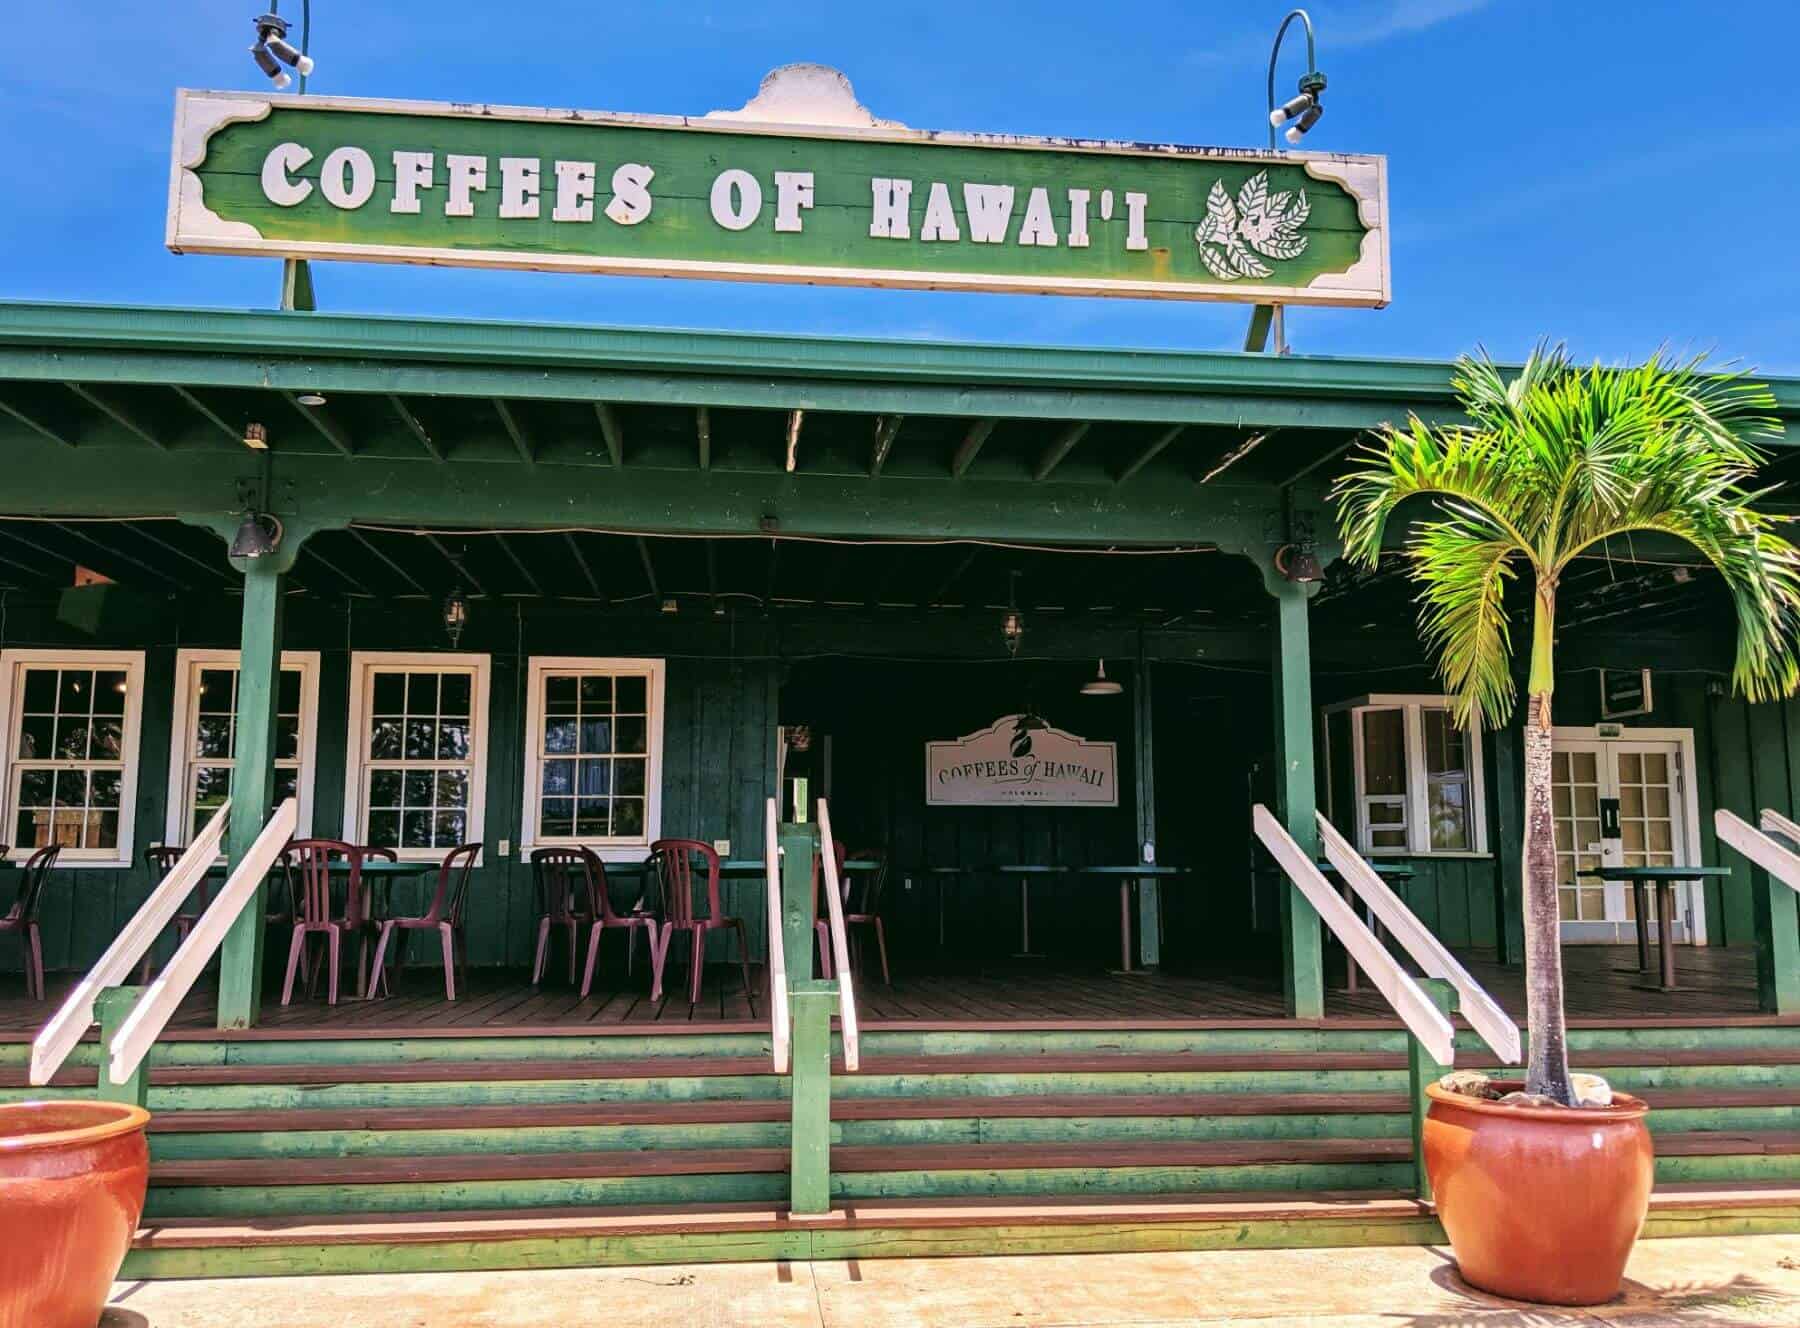 Coffees of Hawaii storefront green building